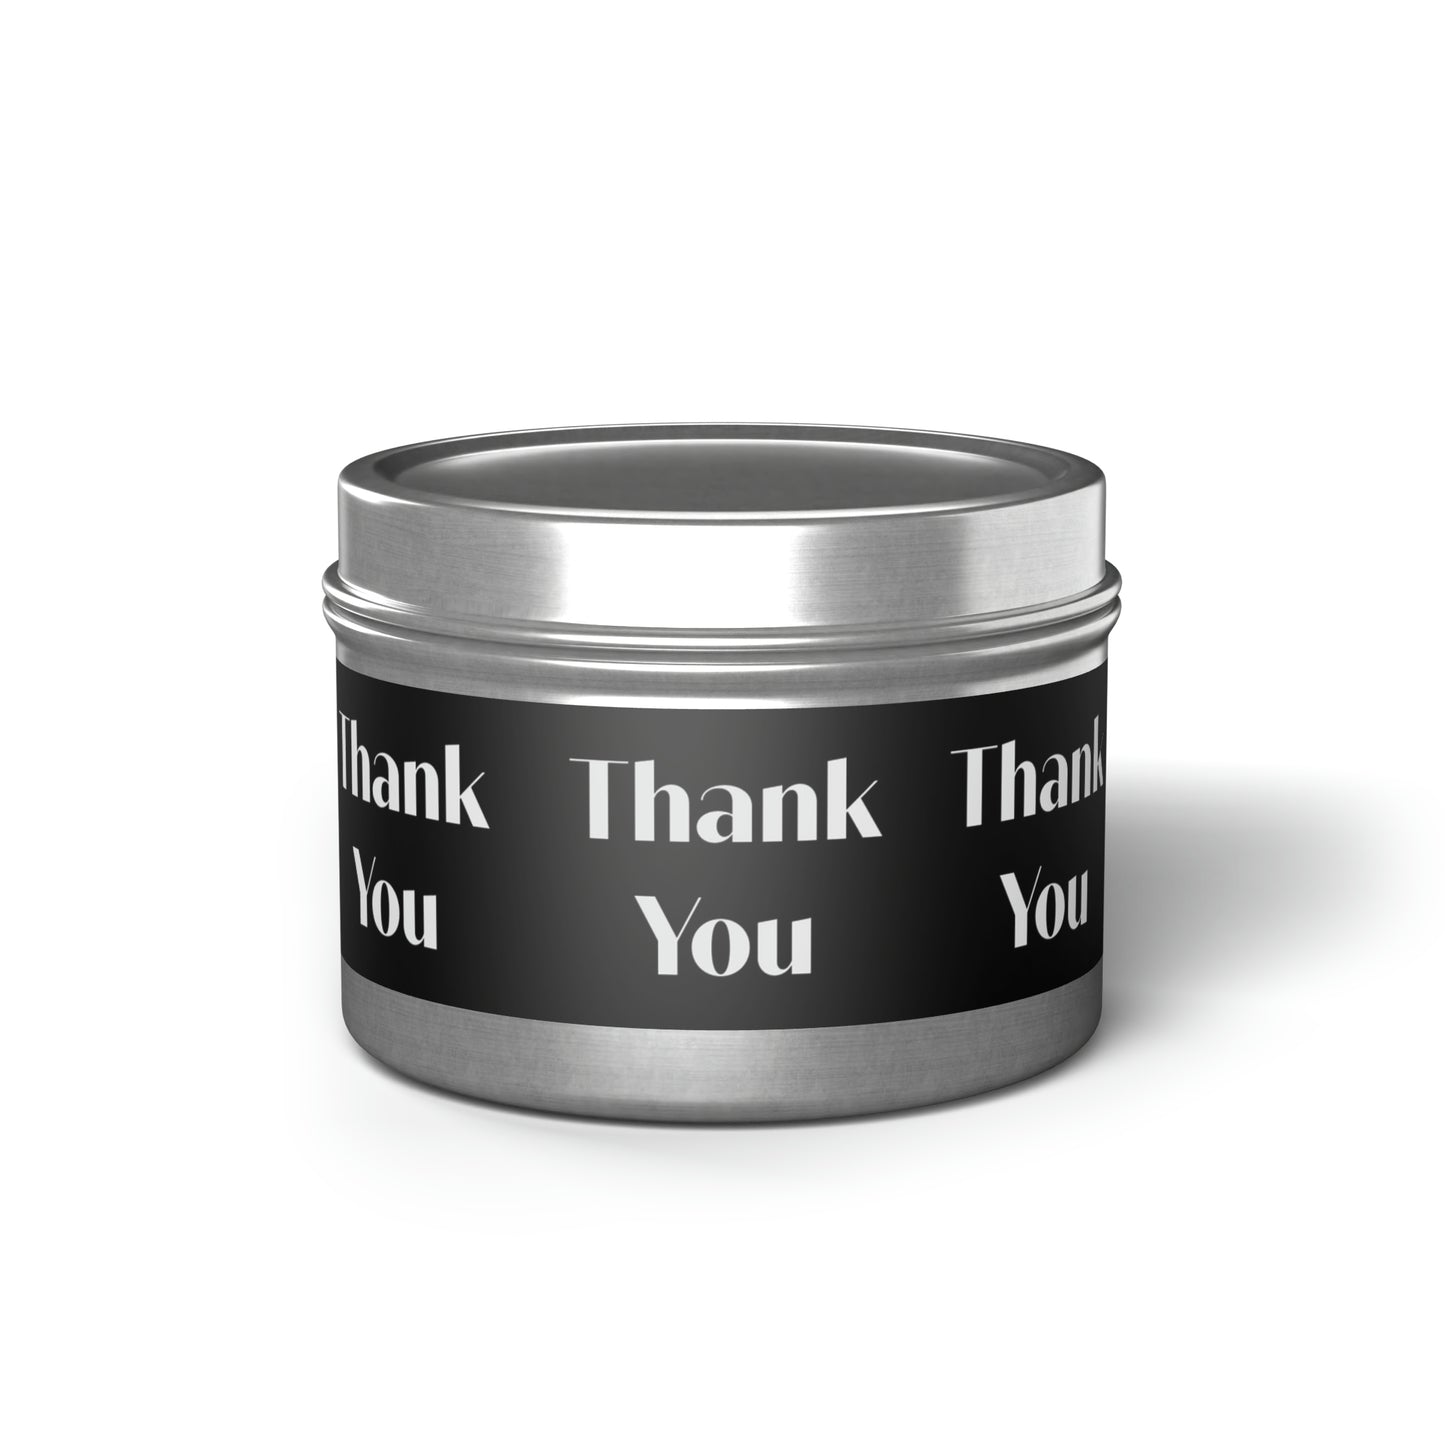 Thank-you Tin Candles: 4 oz; 5 scents; Textual message